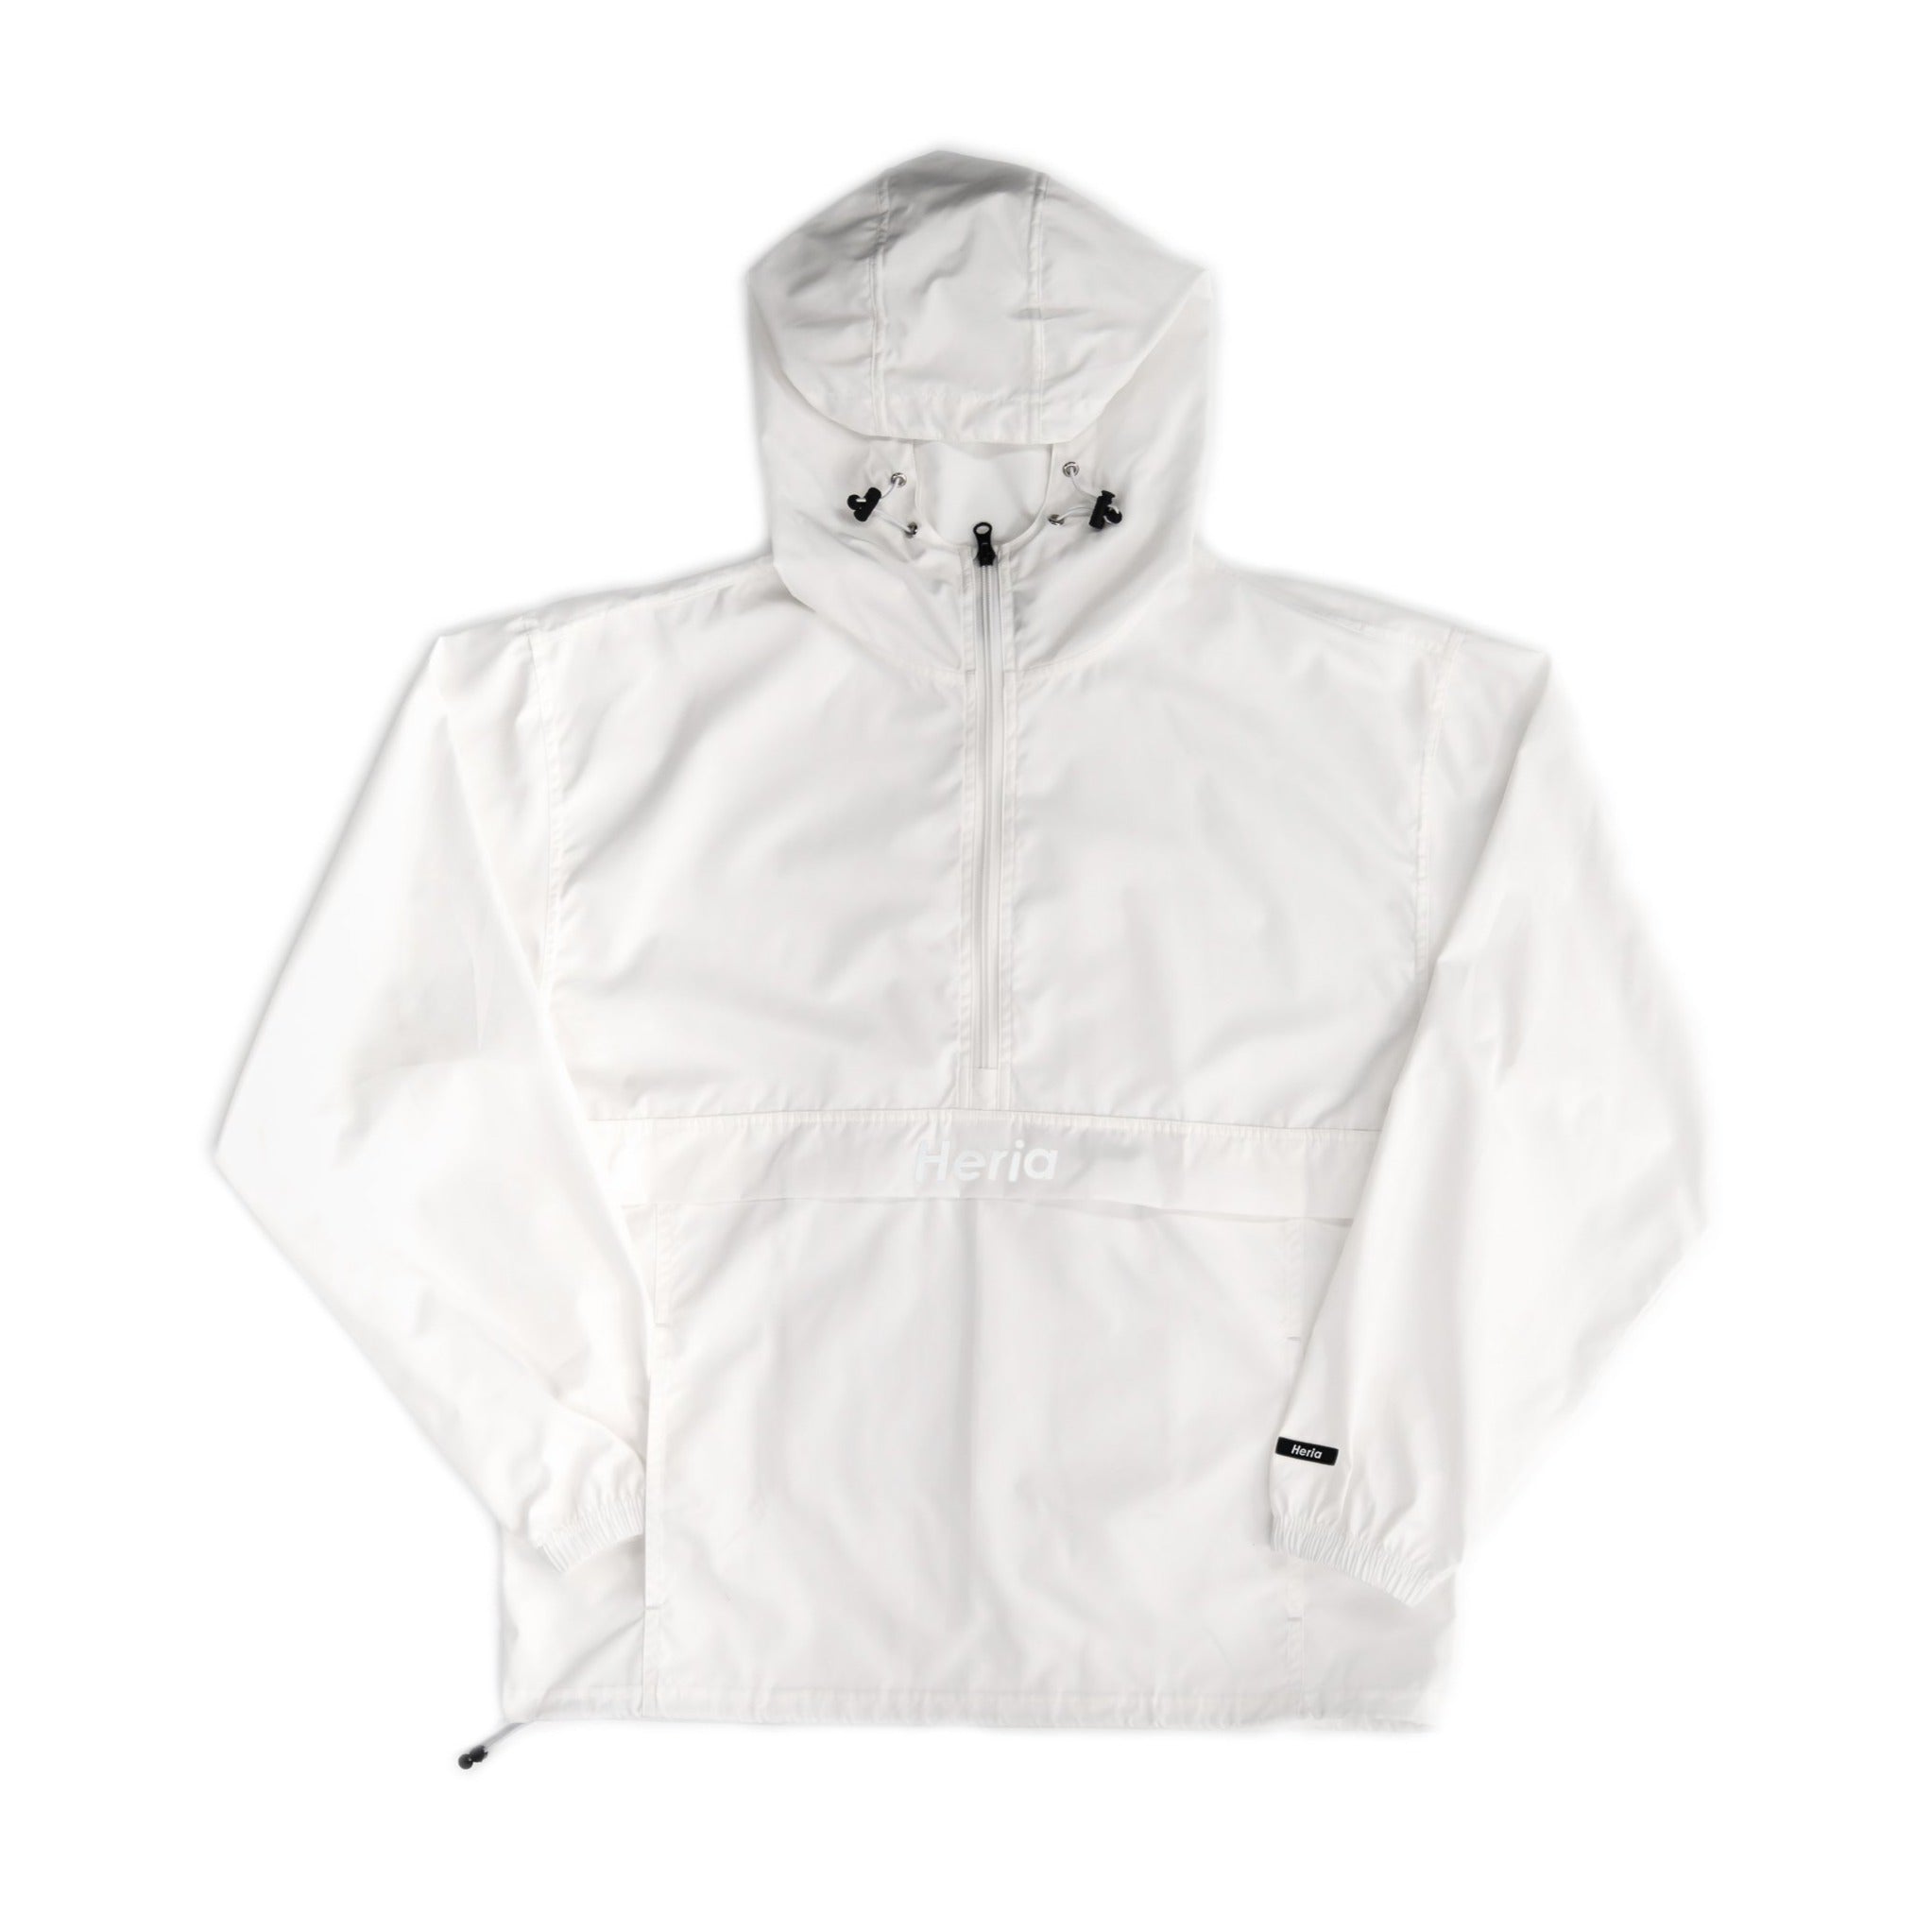 Heria Weatherproof Jacket - Could White (6619582136362)